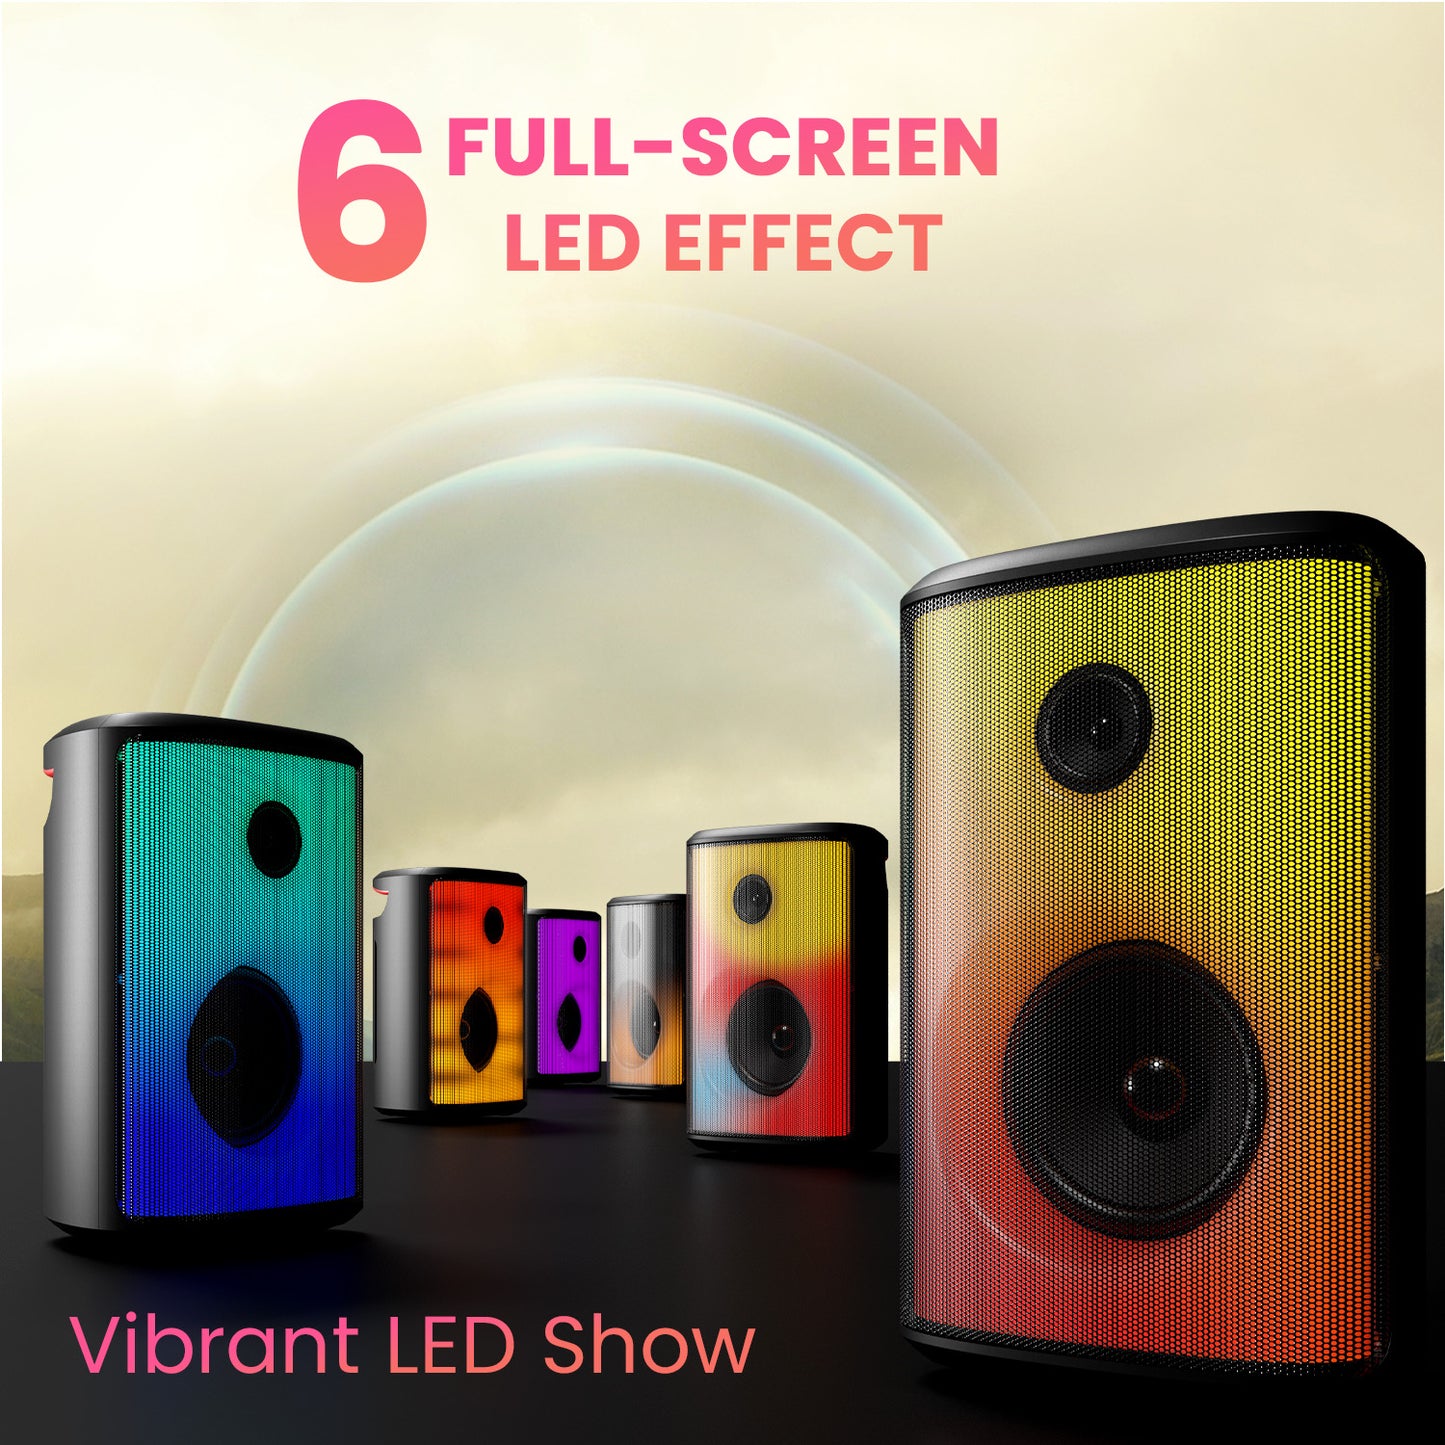 Black Portronics Dash 8 bluetooth party speaker comes with full screen led light effect